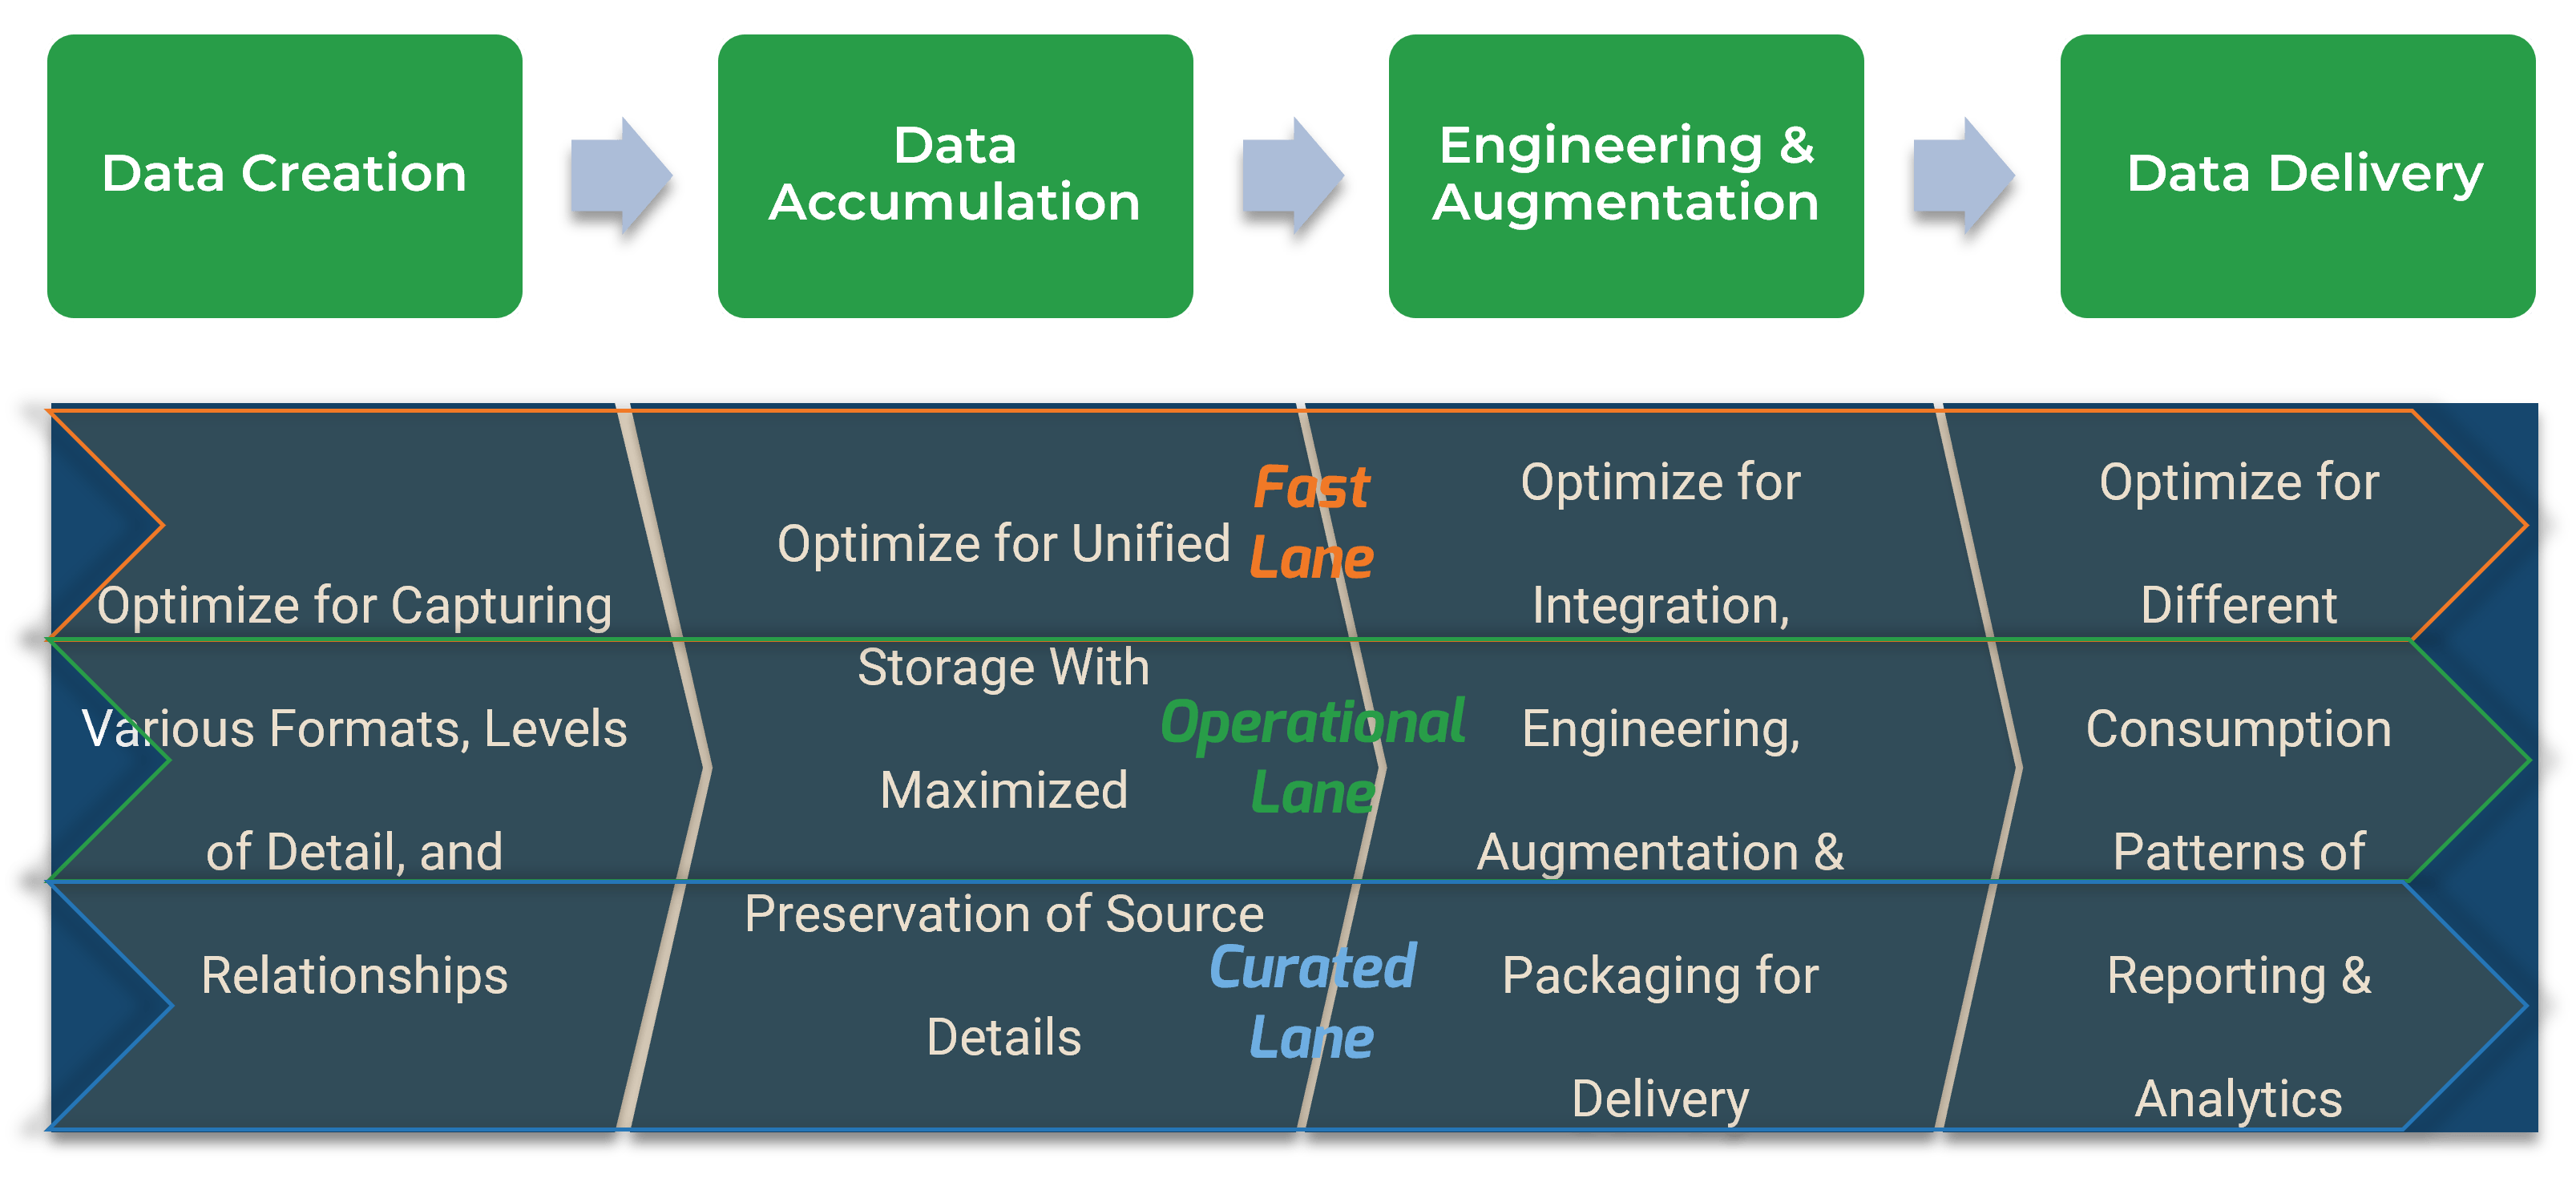 a diagram showing the path from 'Data Creation' to 'Data Accumulation', to 'Engineering & Augmentation', to 'Data Delivery'. Each step has a 'Fast Lane', 'Operational Lane', and 'Curated Lane'.